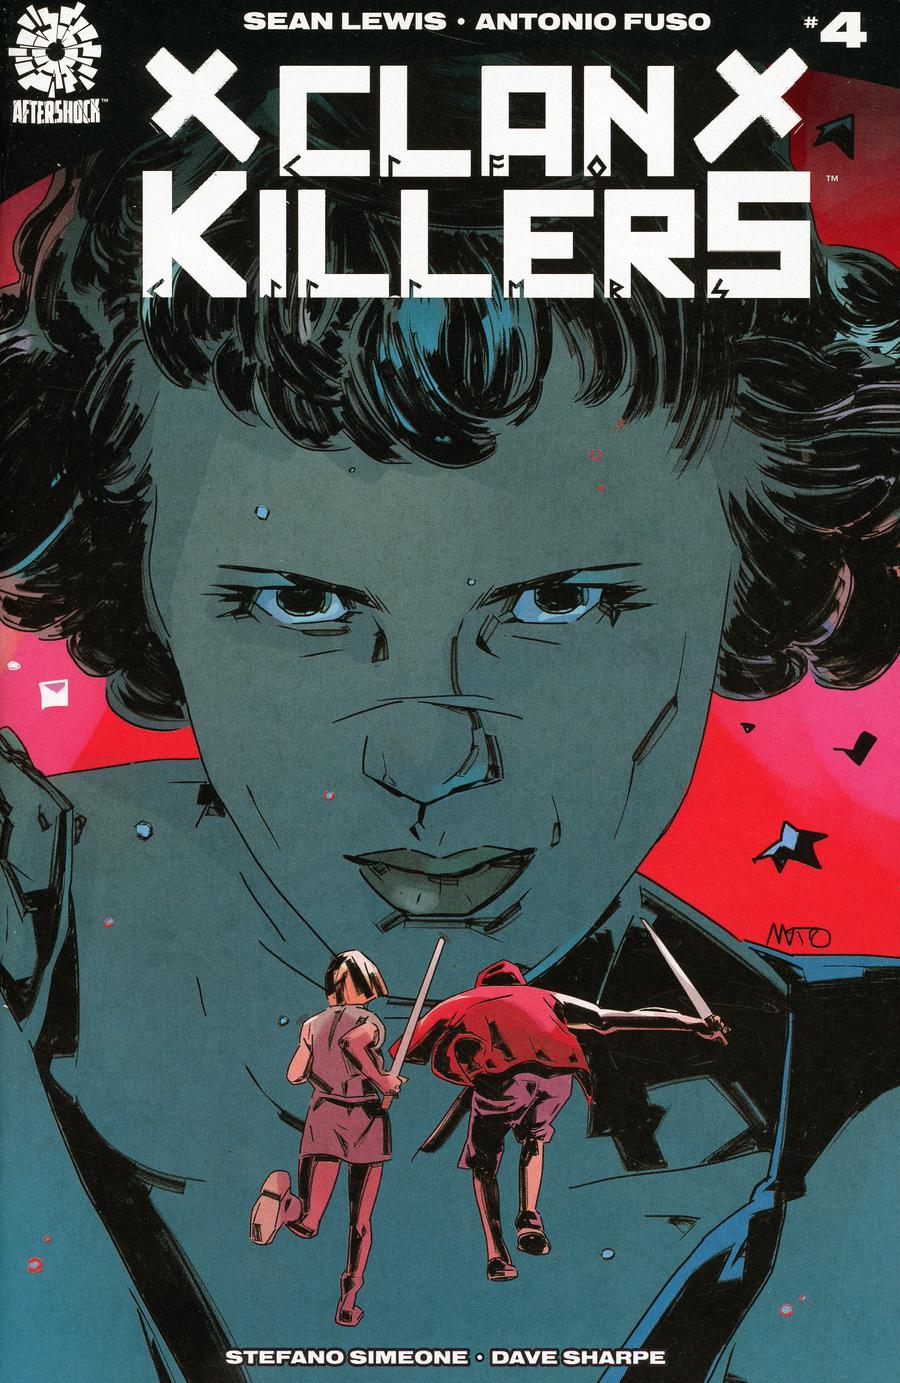 Clankillers Vol. 1 #4